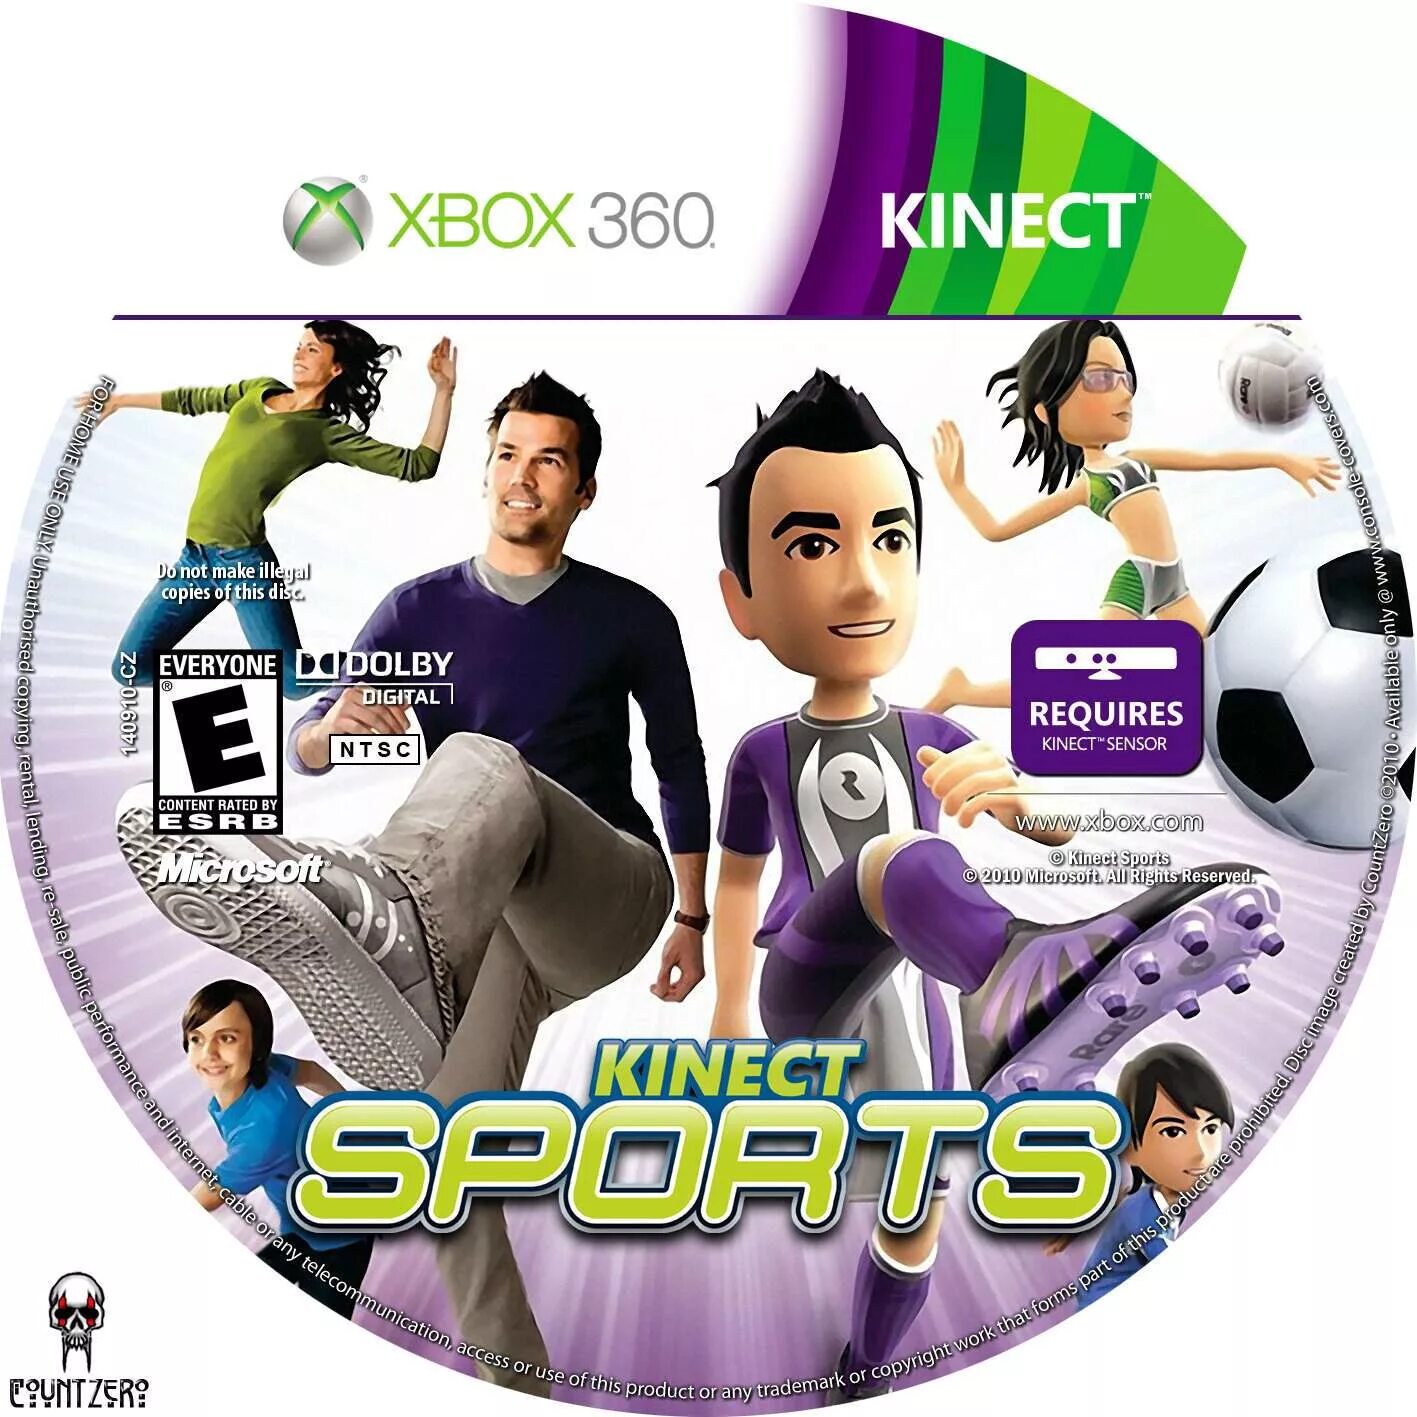 Kinect sports xbox. Xbox 360 Kinect Sports Ultimate. Kinect Sports Xbox 360 Disk. Kinect Sports Xbox 360 DVD. Kinect Sport Ultimate collection Xbox 360.